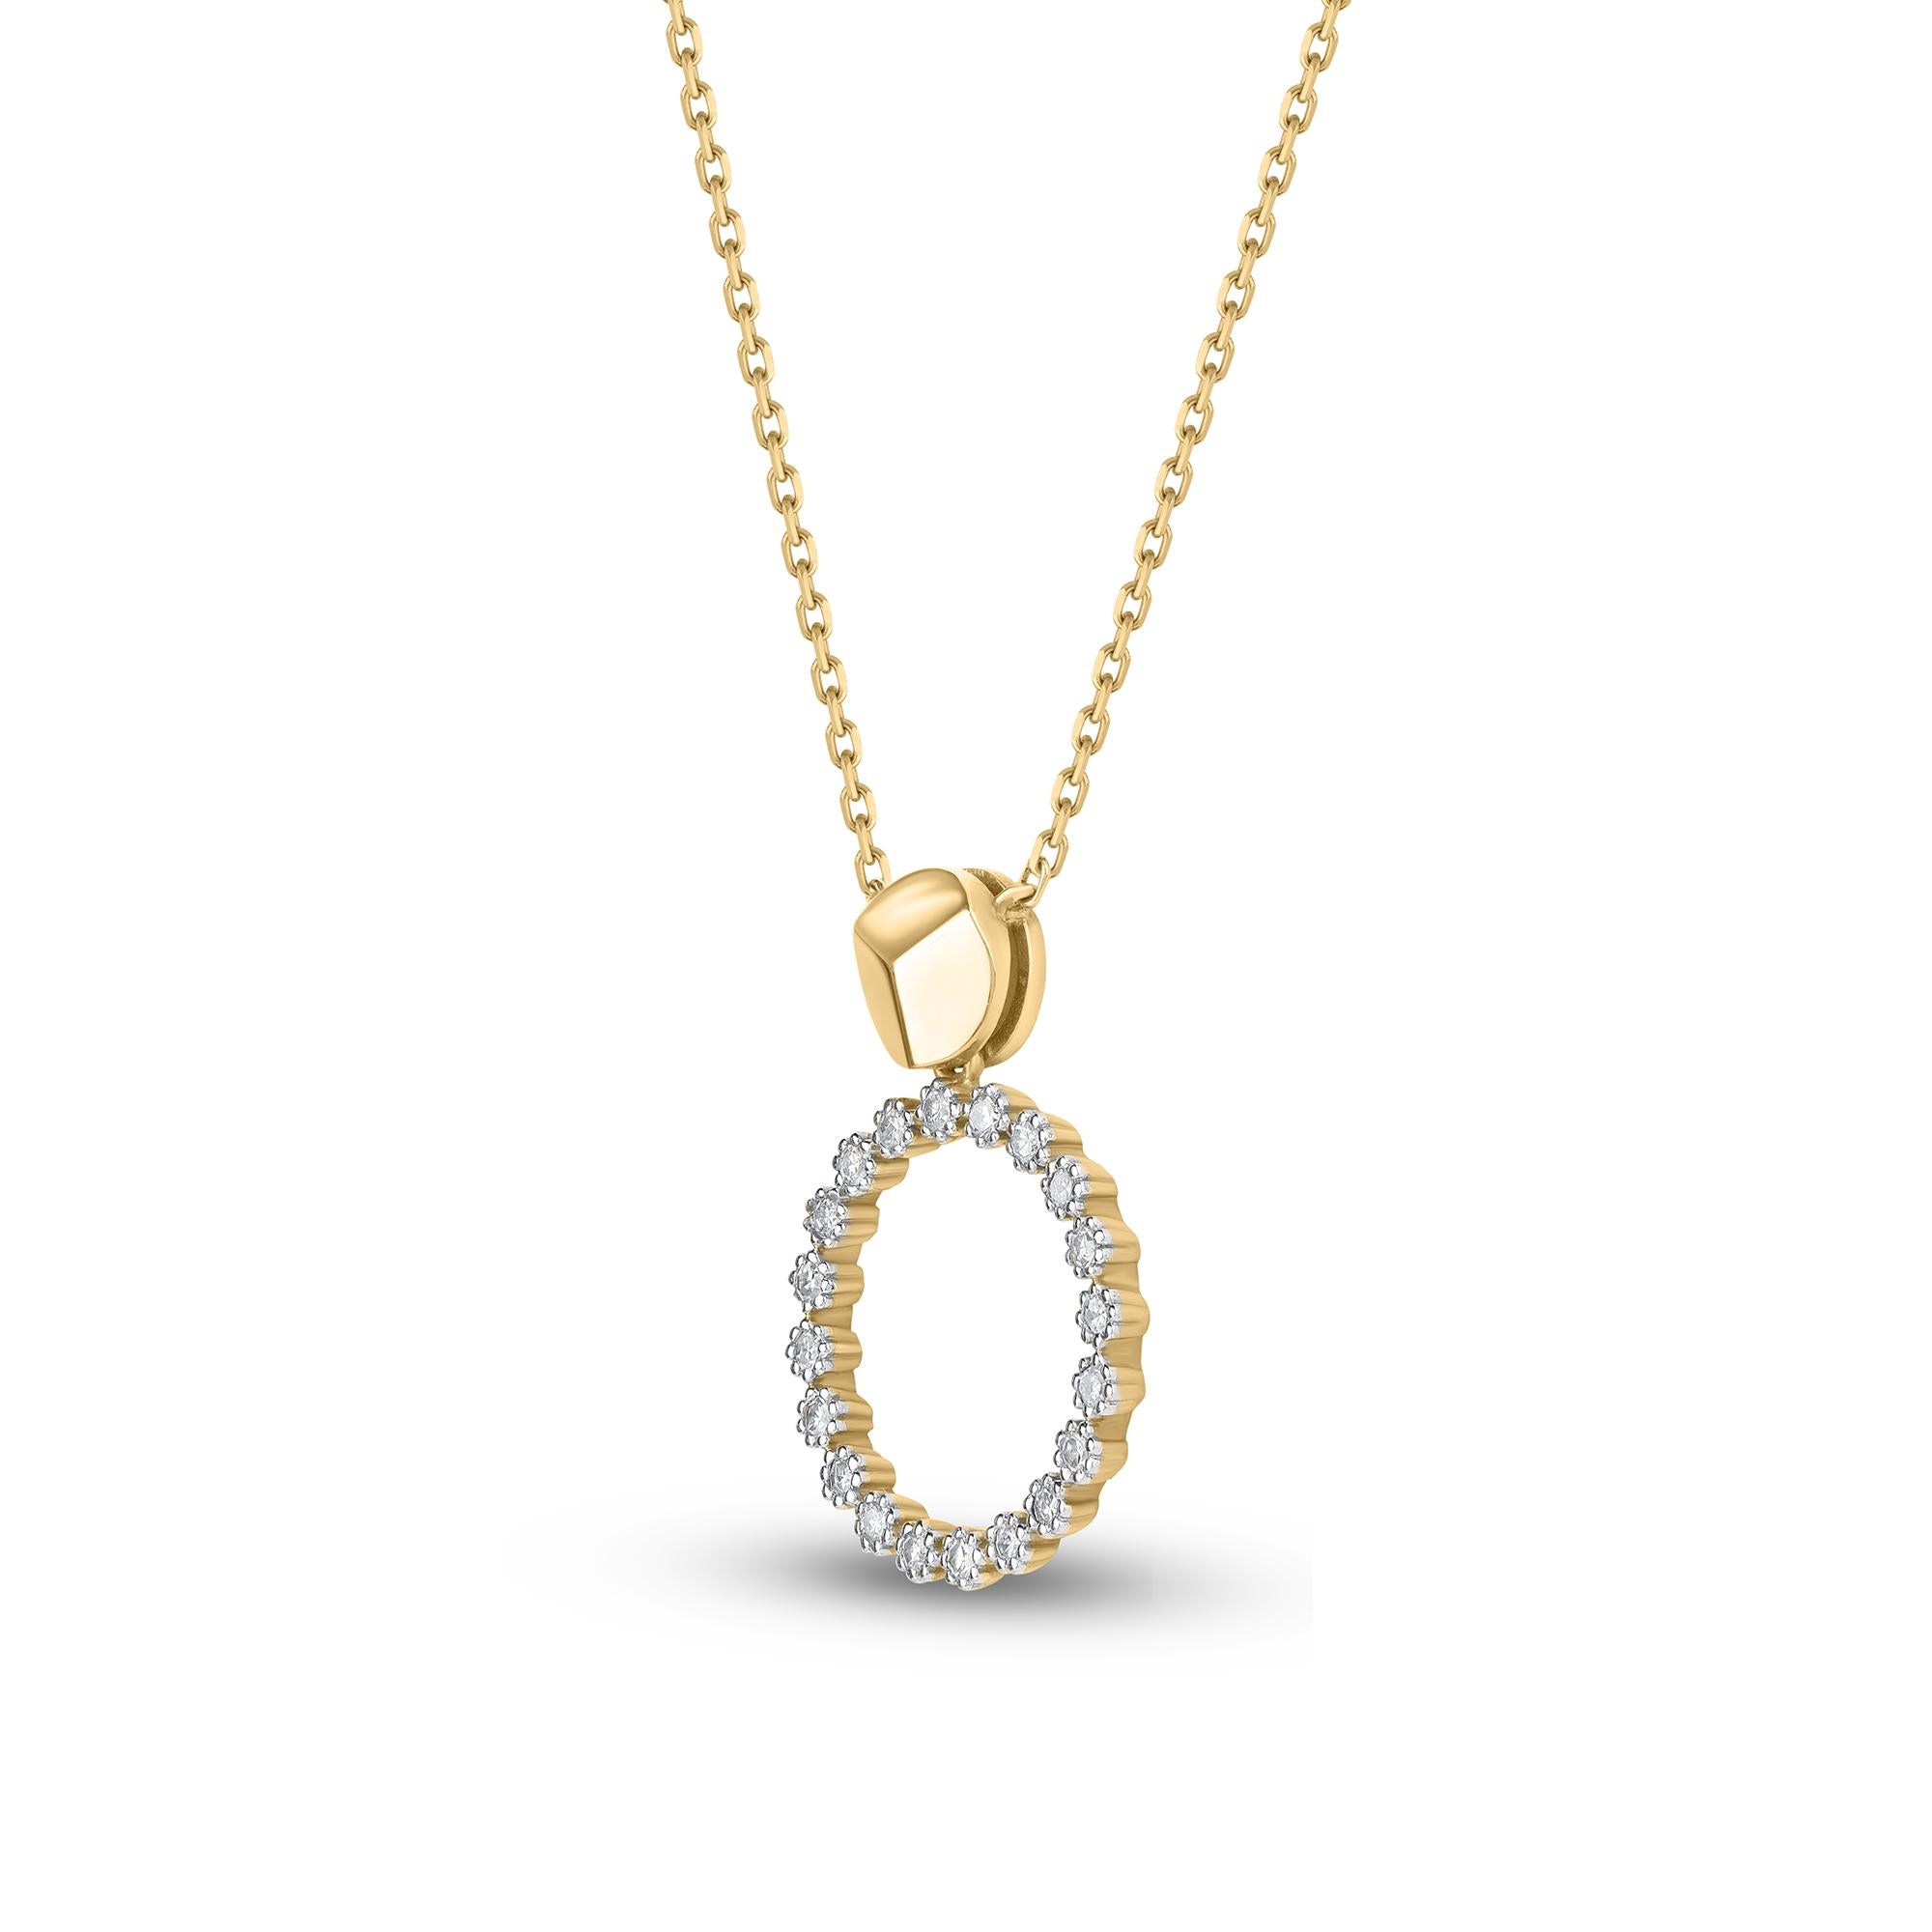 A flawless fusion of round diamonds and yellow gold, this circular diamond pendant is embellished with 20 round-cut diamonds in prong setting and handcrafted by our in-house experts in 18 KT Yellow gold. Diamonds are graded HI color, I1 clarity.  